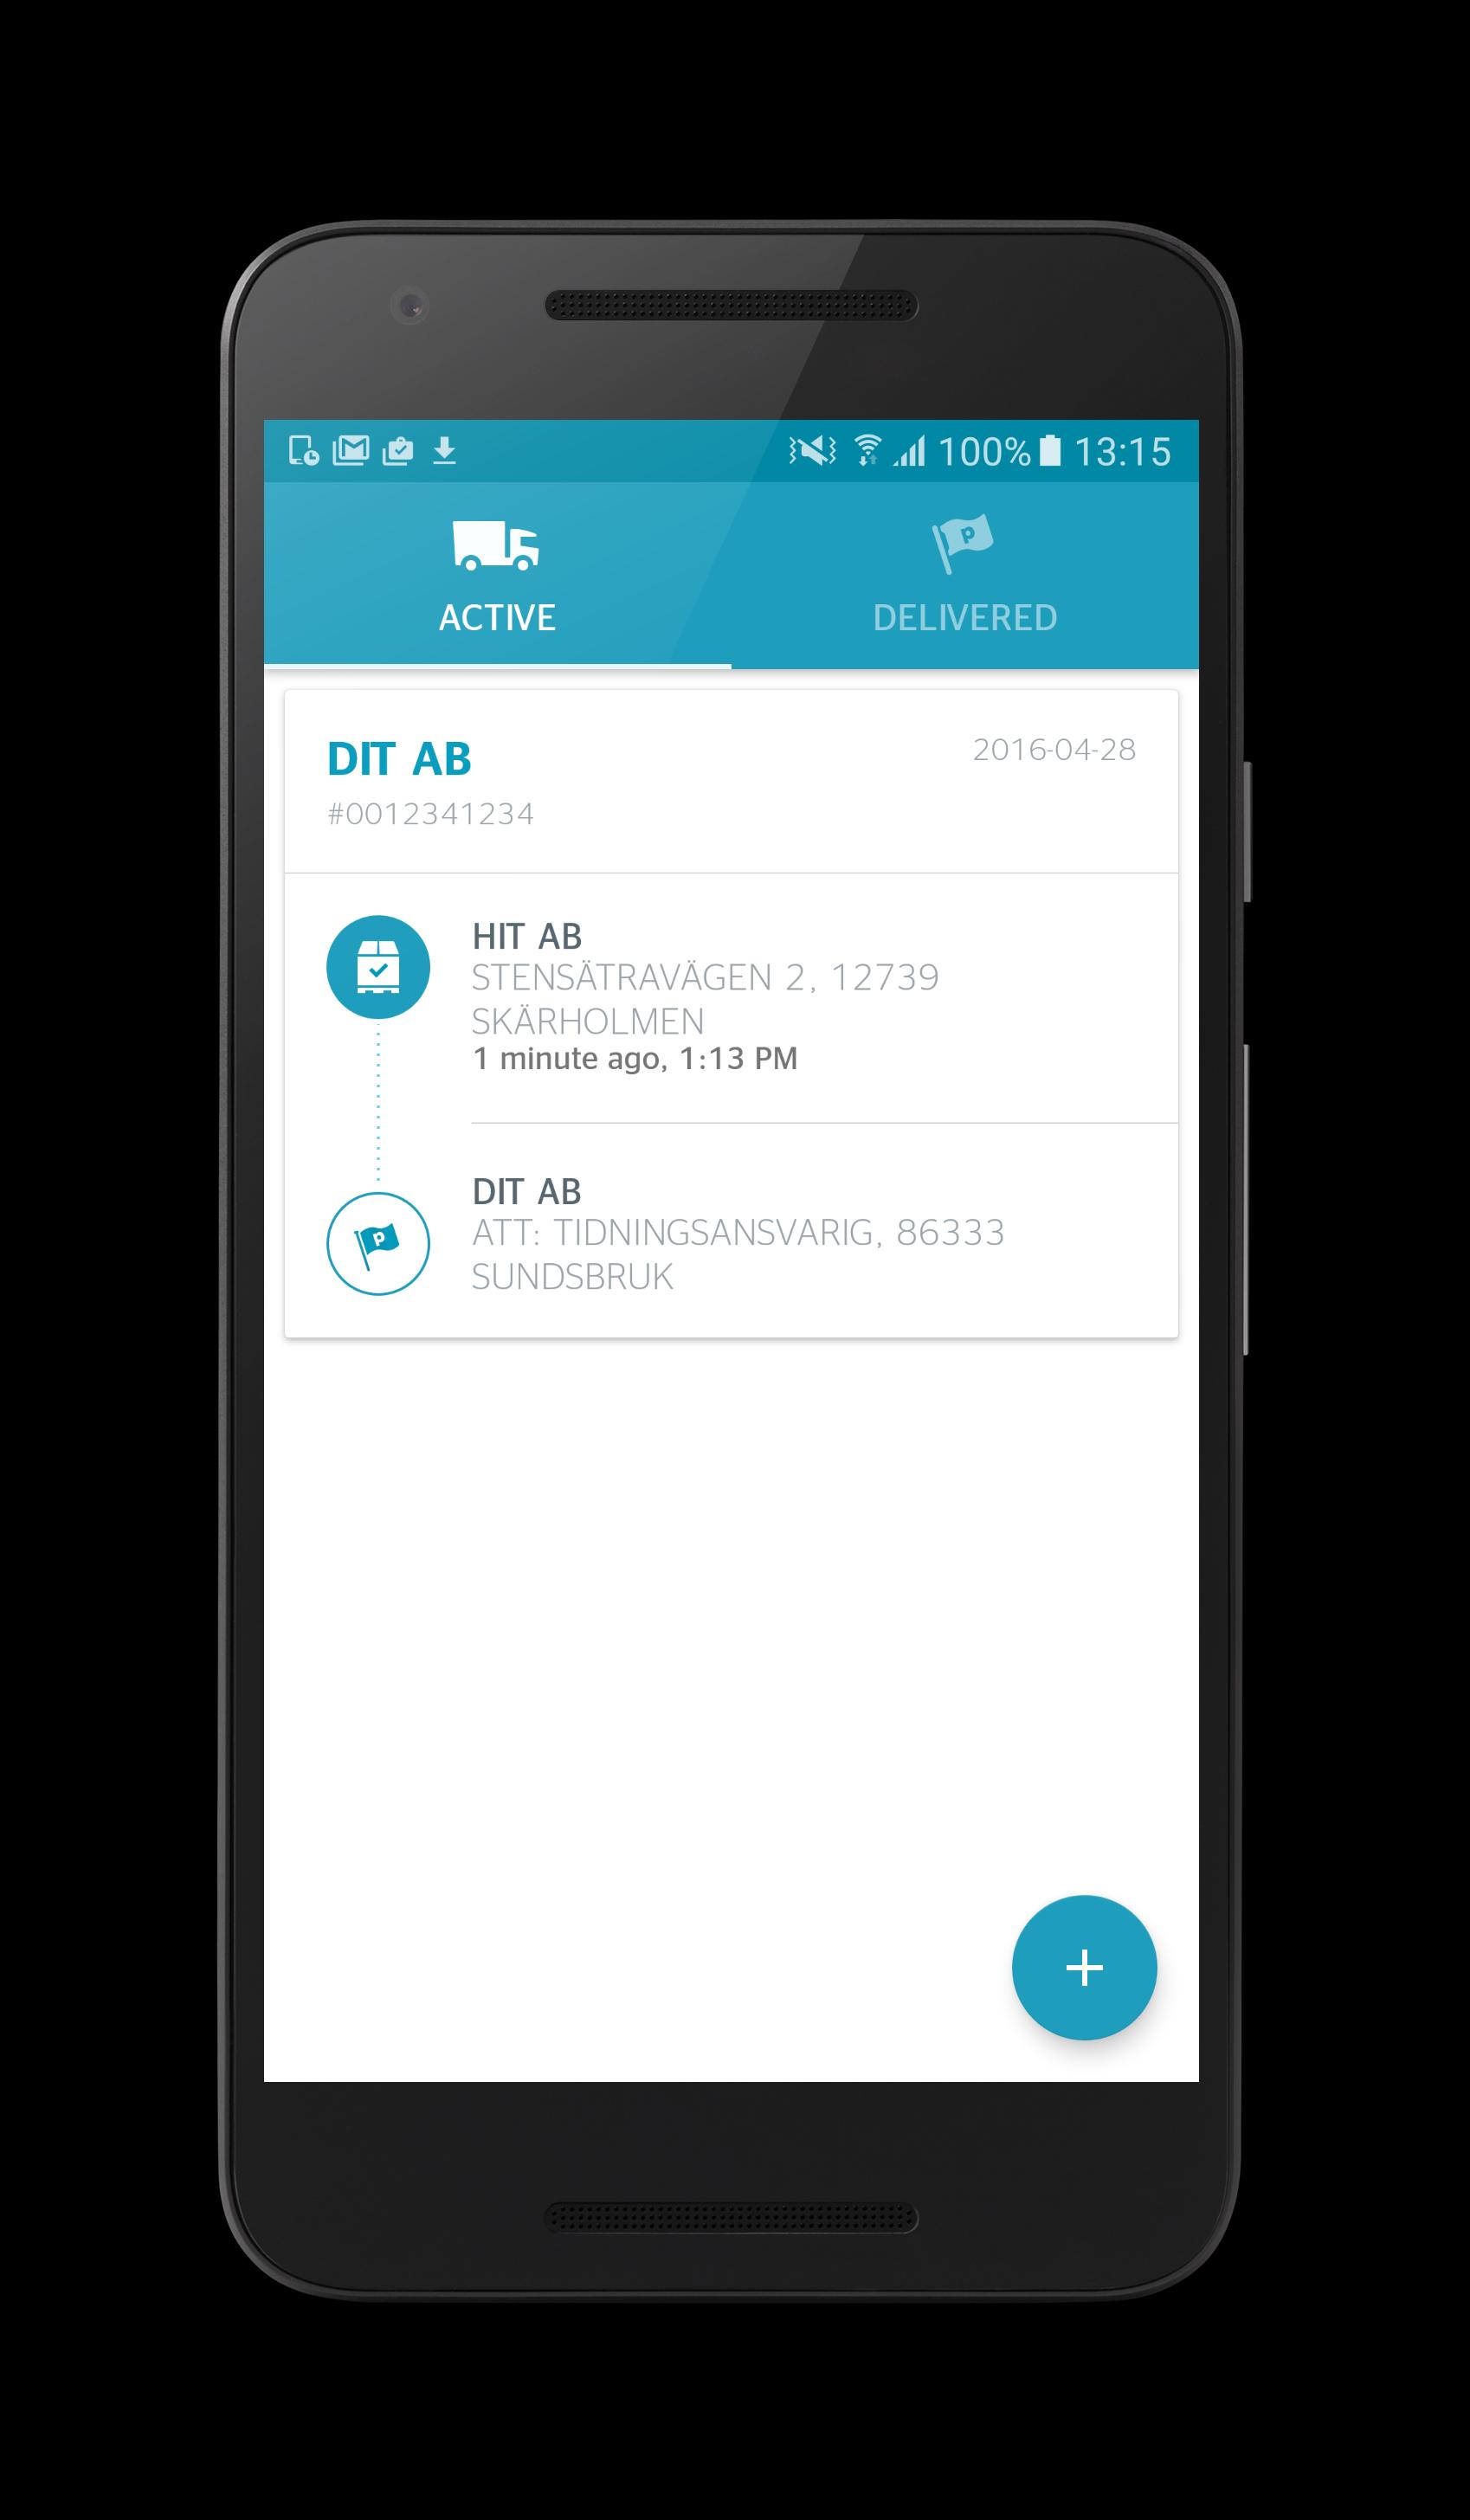 PostNord Road for Android - APK Download